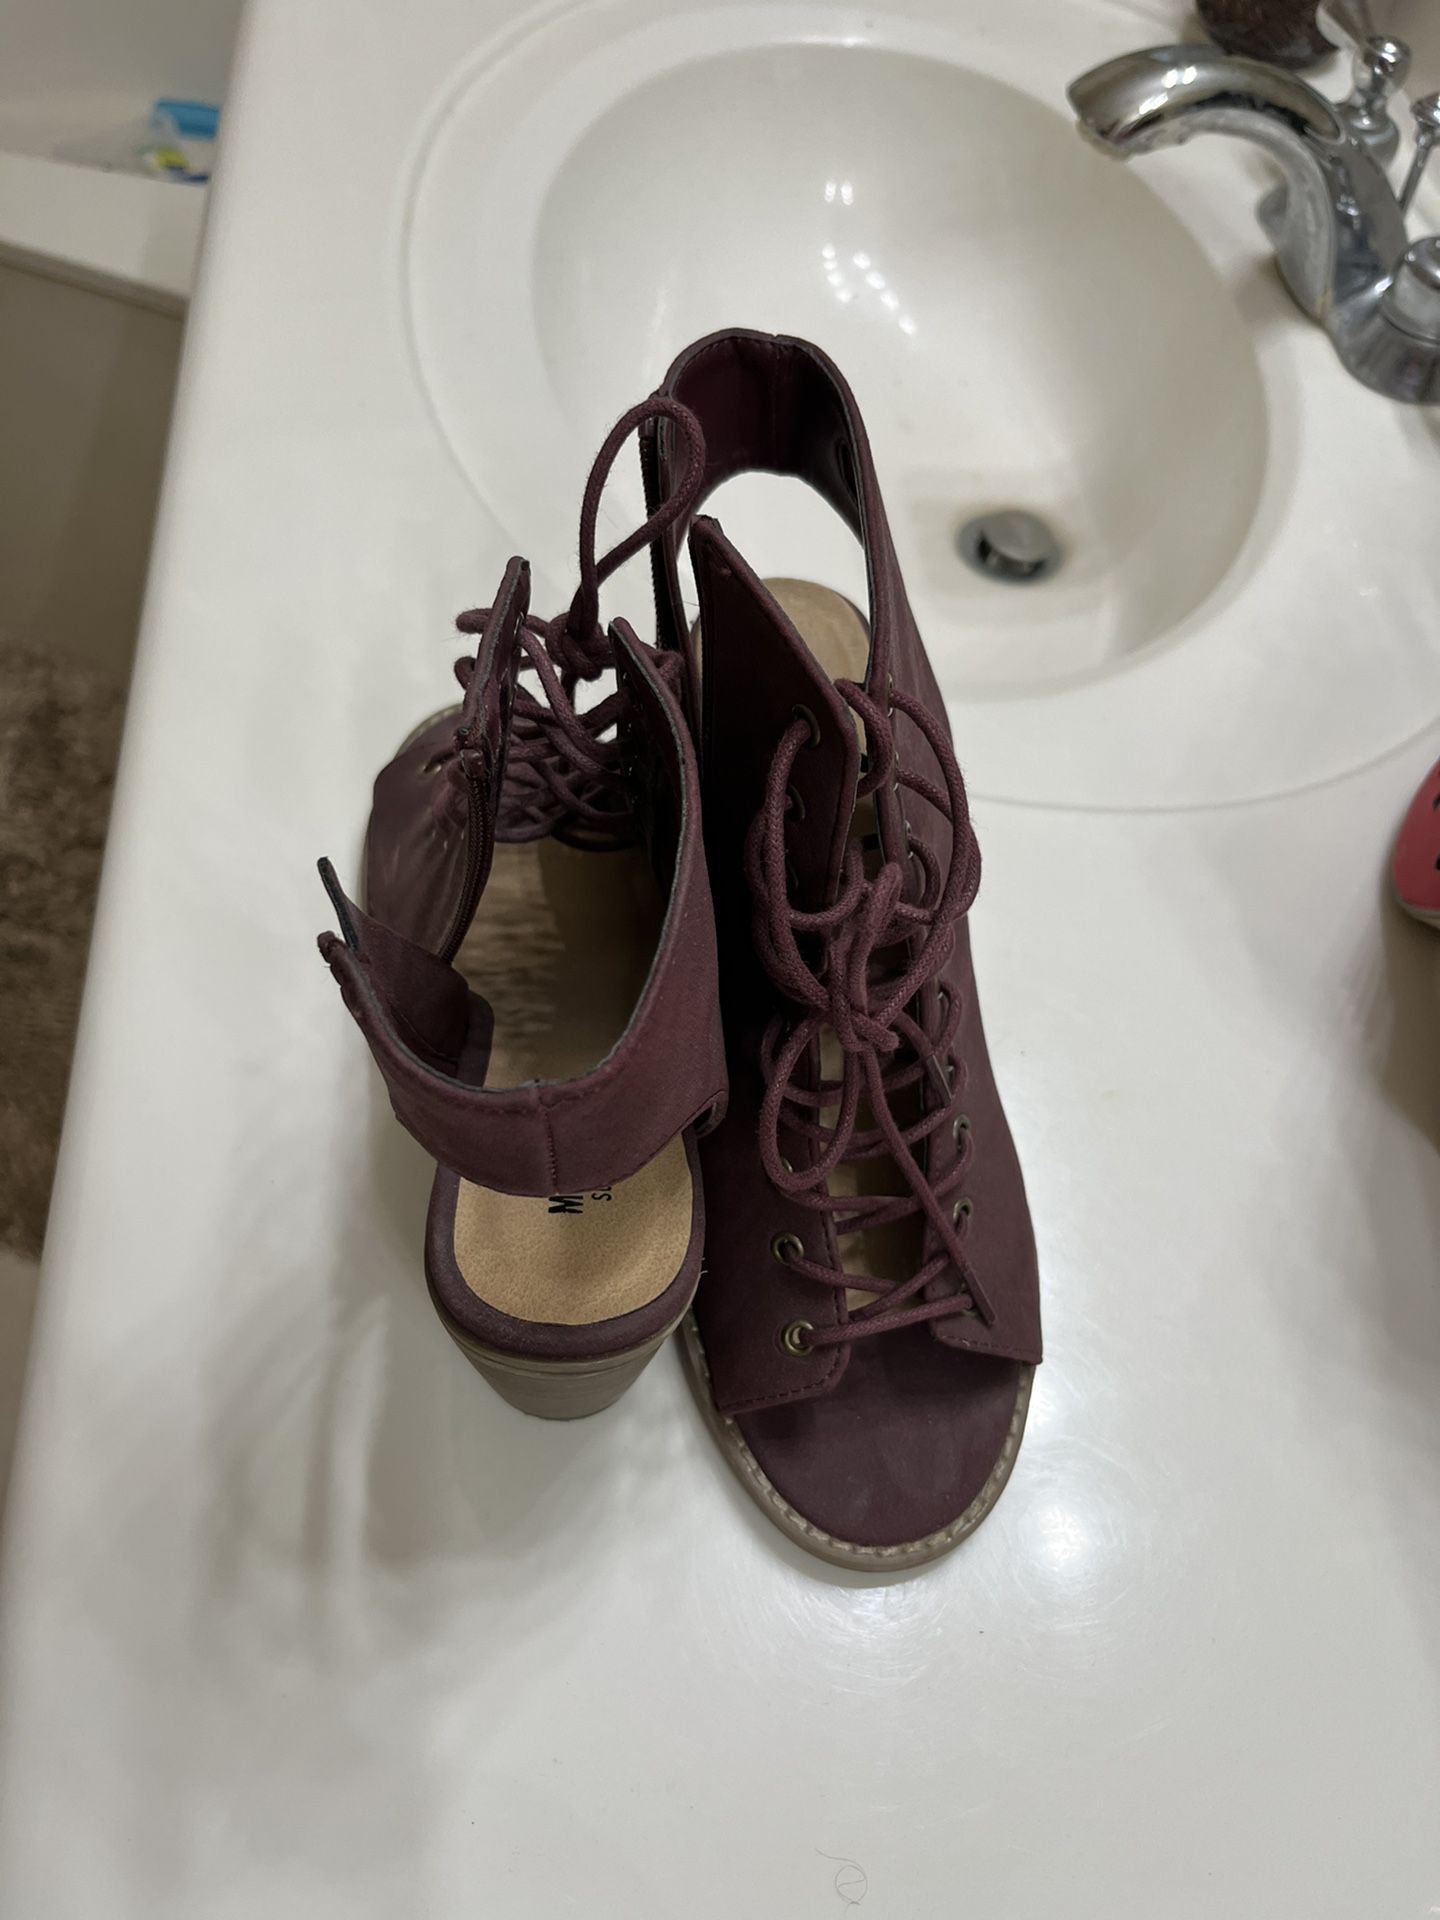 Woman’s Shoes Size 6 1/2 And 7 